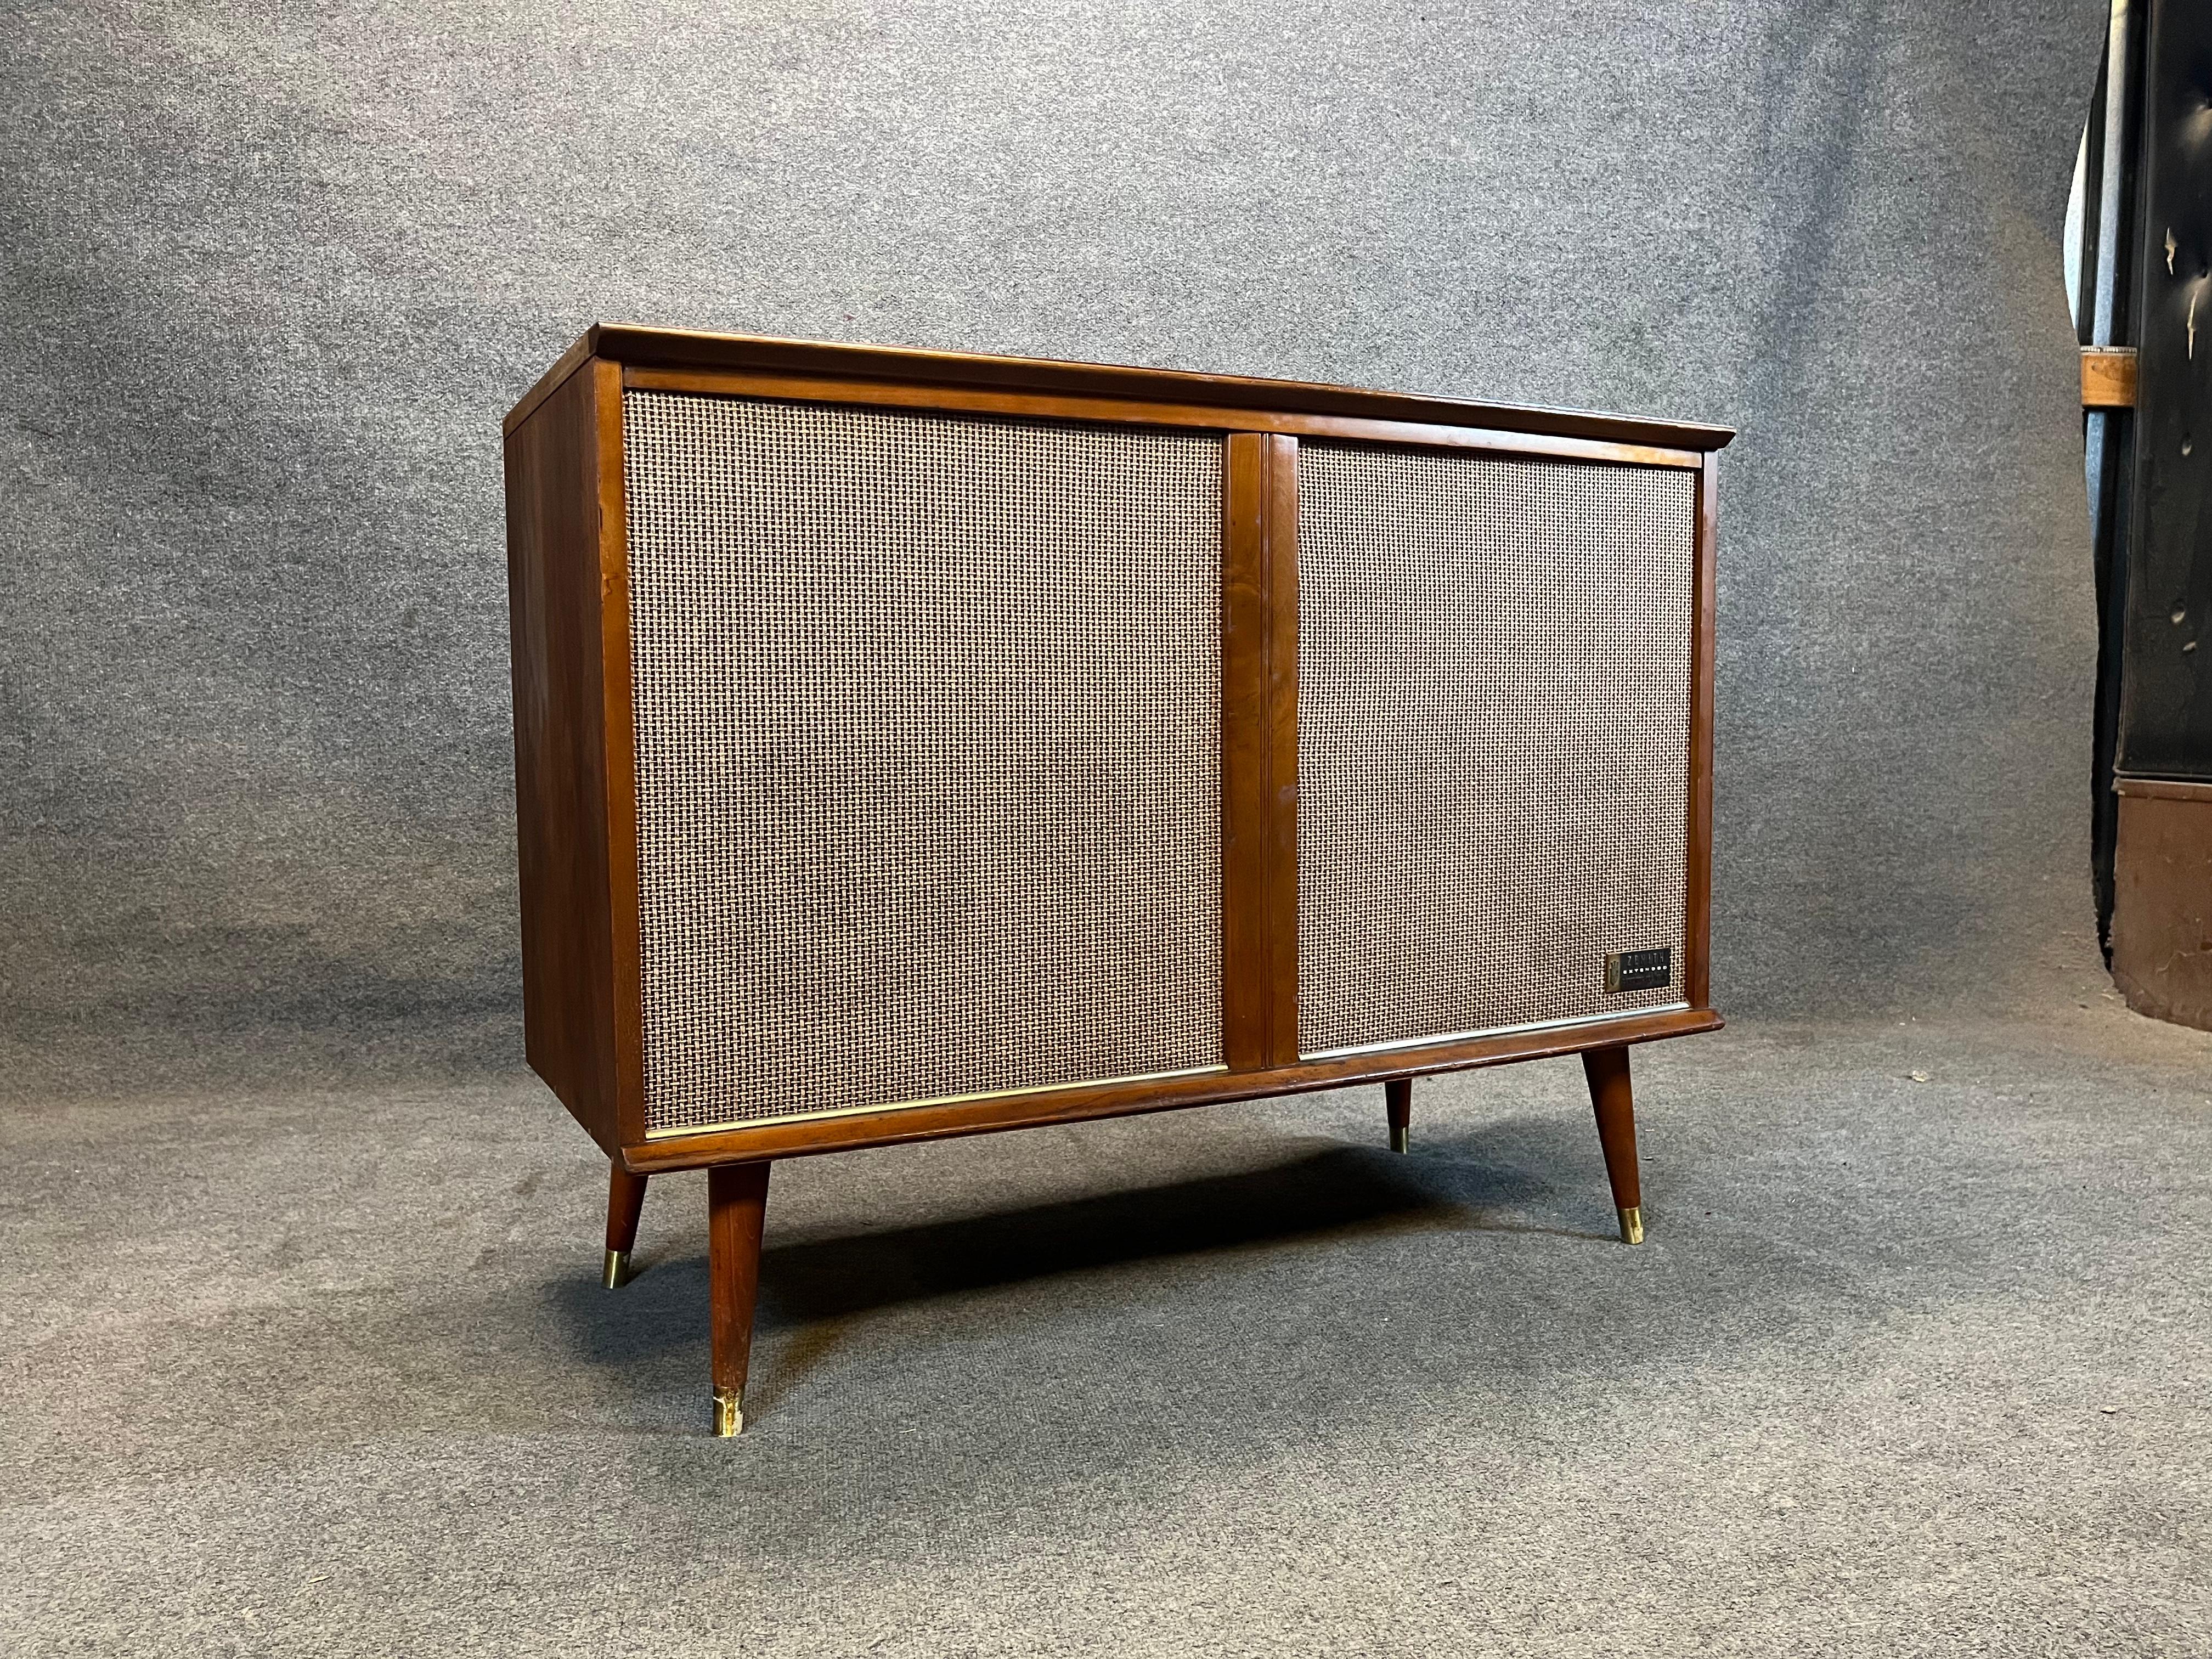 Mid Century Modern Stereo Console By Zenith - Record Changer - AM/FM- Tube Amplifier. This is a great design; stunning visuals and lines plus solid mid century quality that would be a FABULOUS addition to your mid century decor. 

Record player has